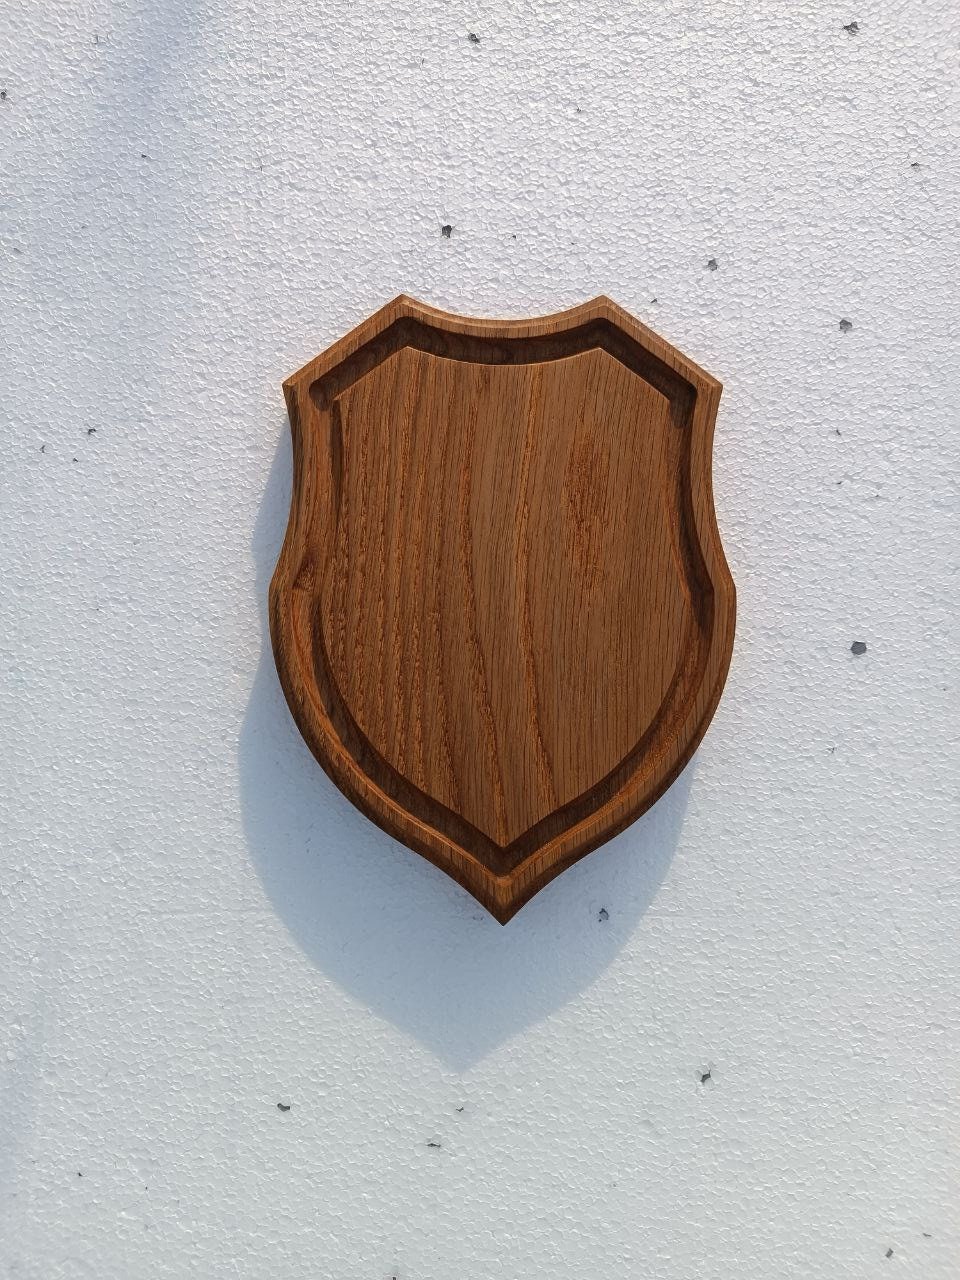 Used Wood Plaque for Taxidermy